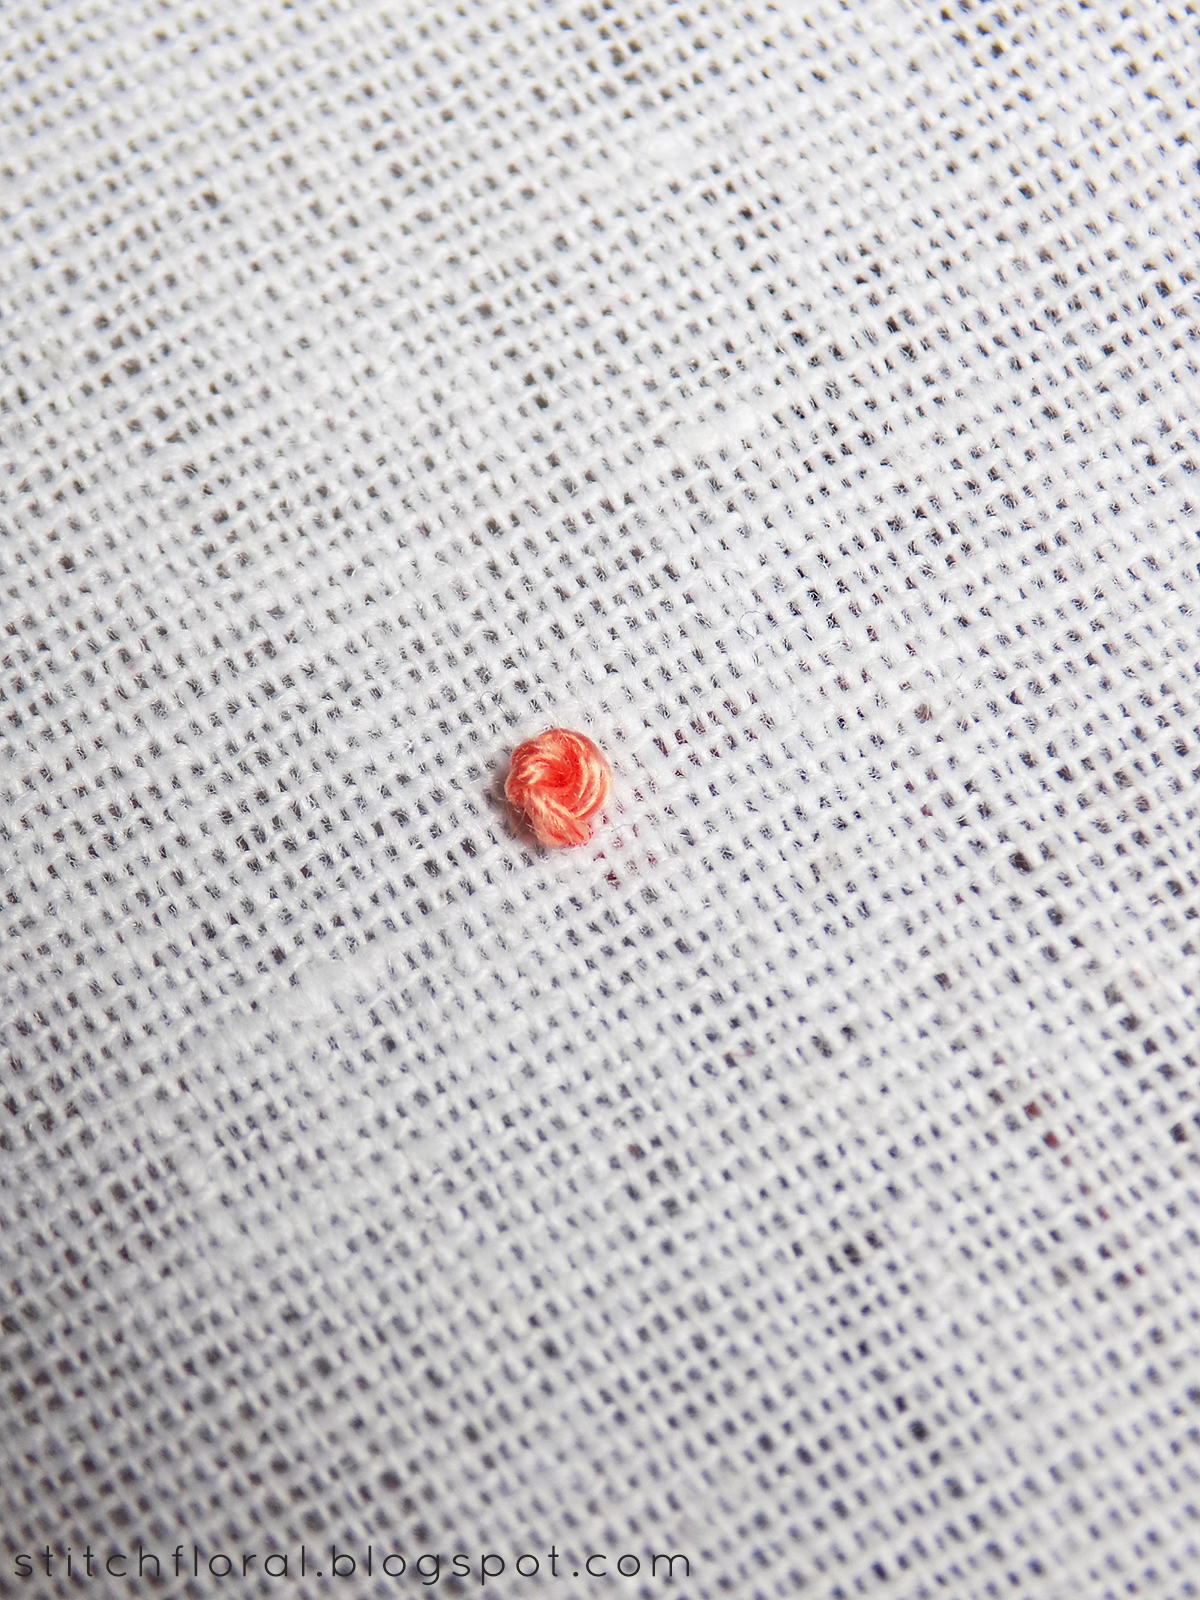 Colonial knot and how's it different from french knot?